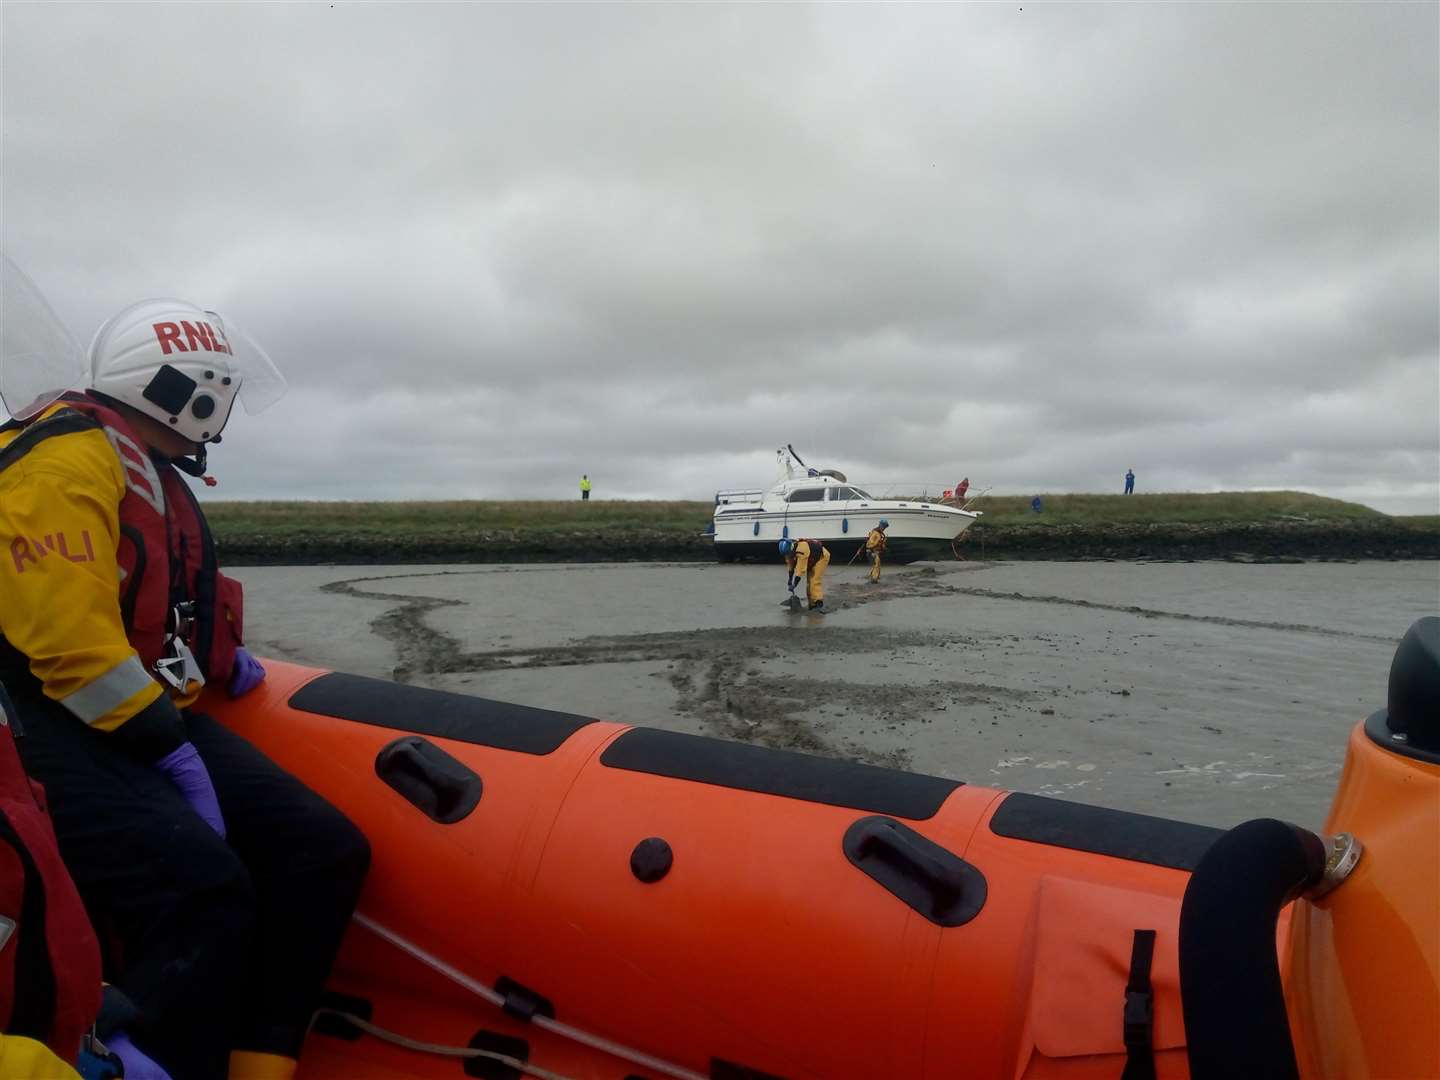 Seen from the Whitstable lifeboat, members of the Sheppey Mobile Coastguard team wearing mud rescue gear reposition the anchor from the motor cruiser aground near the sea wall on the Sheppey side of The Swale opposite Ridham Dock on Saturday morning. Picture: Dave Parry/RNLI Whitstable.